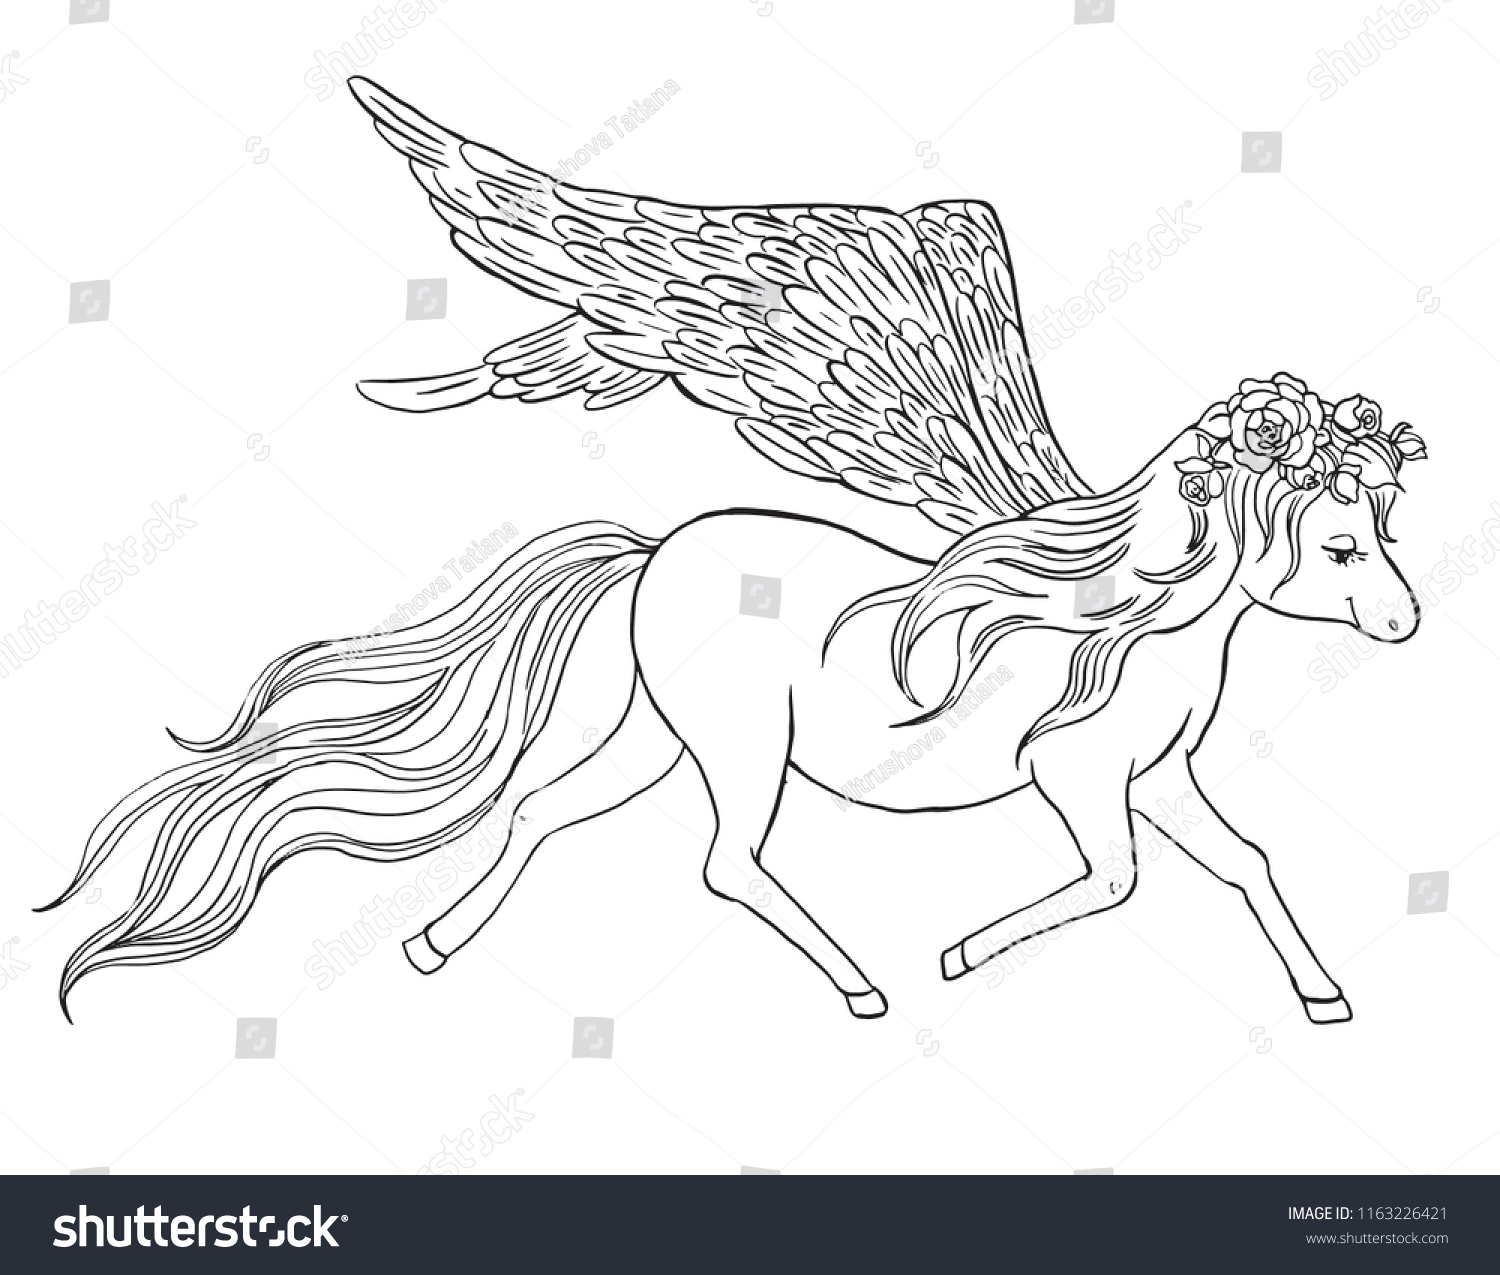 Flying pegasus coloring page kids stock vector royalty free